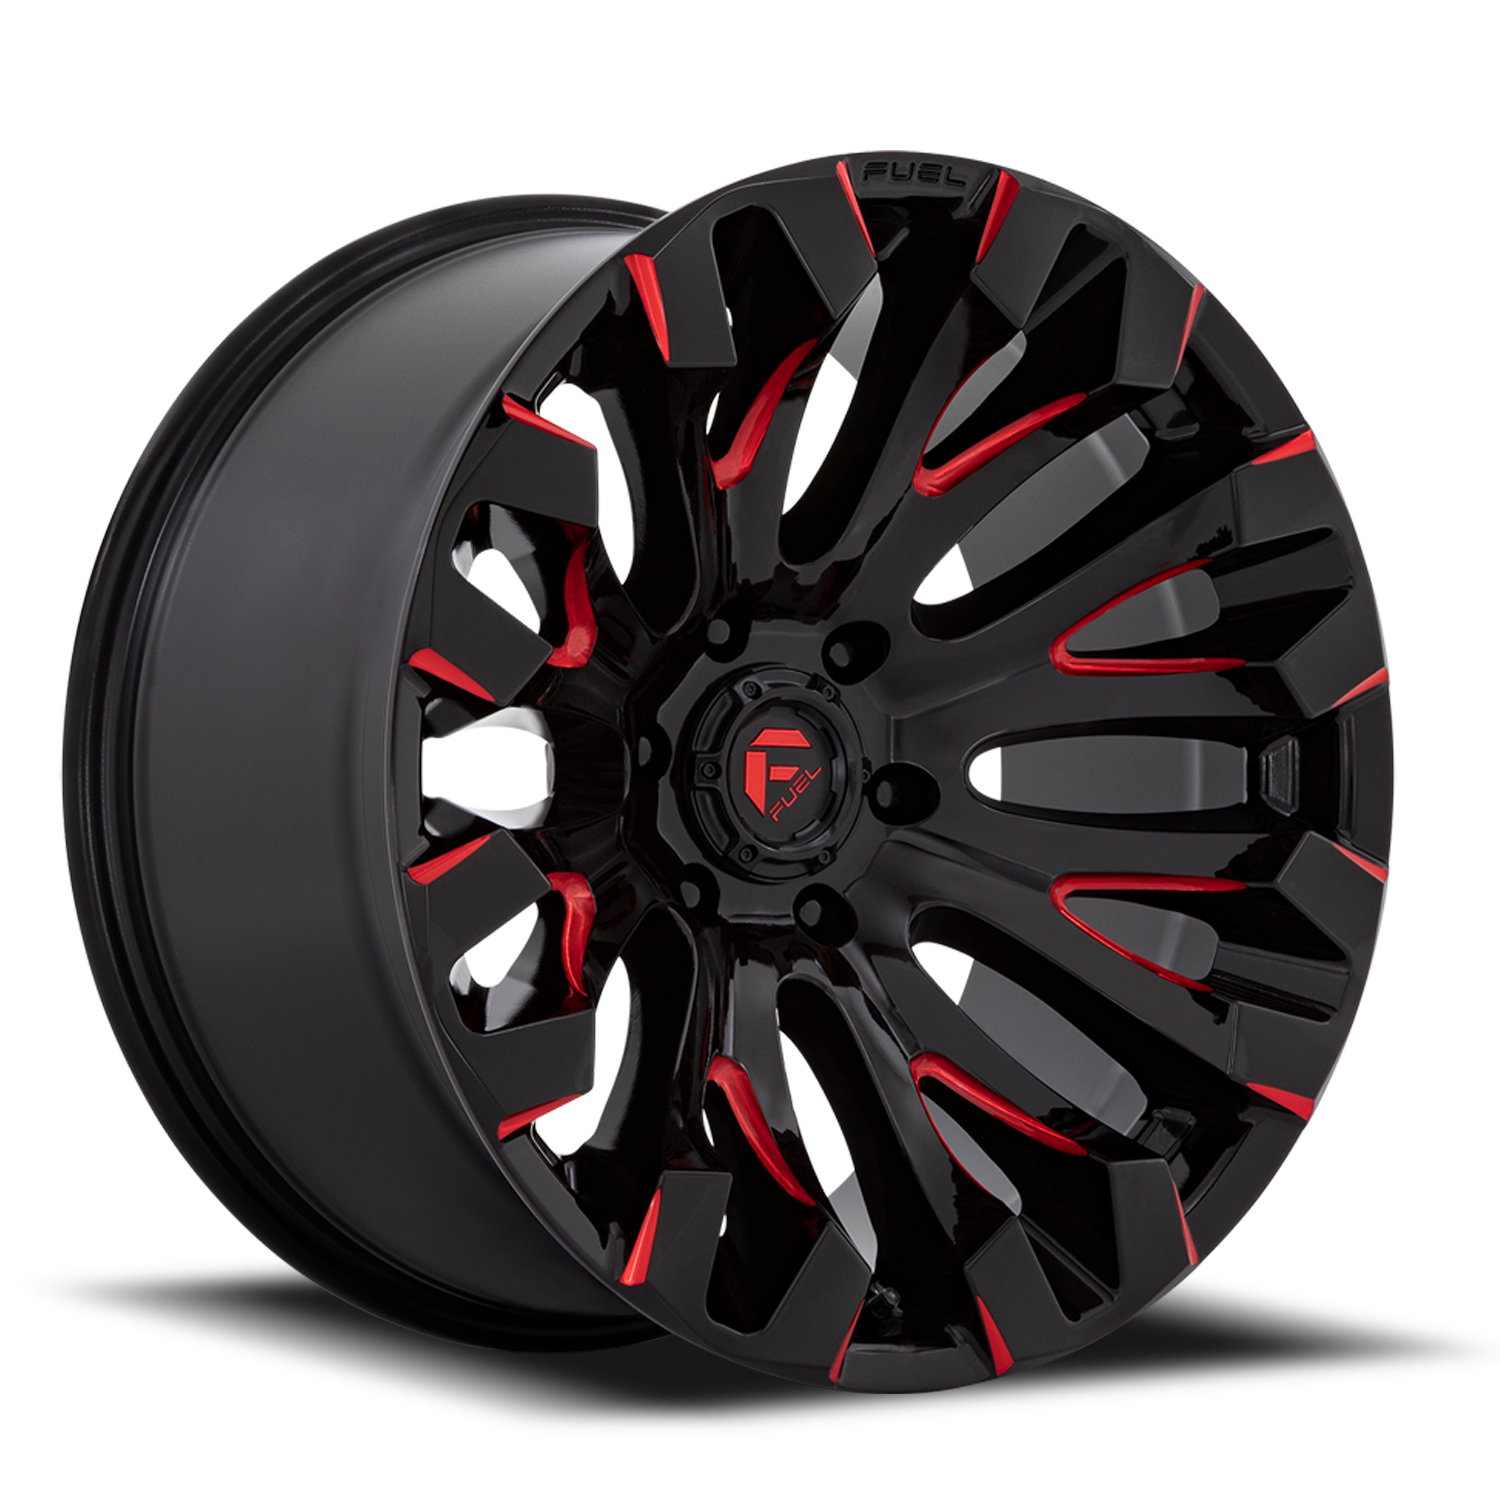 Aluminum Wheels 20X9 Quake D829 6 On 135 Gloss Black Milled Red 87.1 Bore 1 Offset Fuel Off Road Wheels